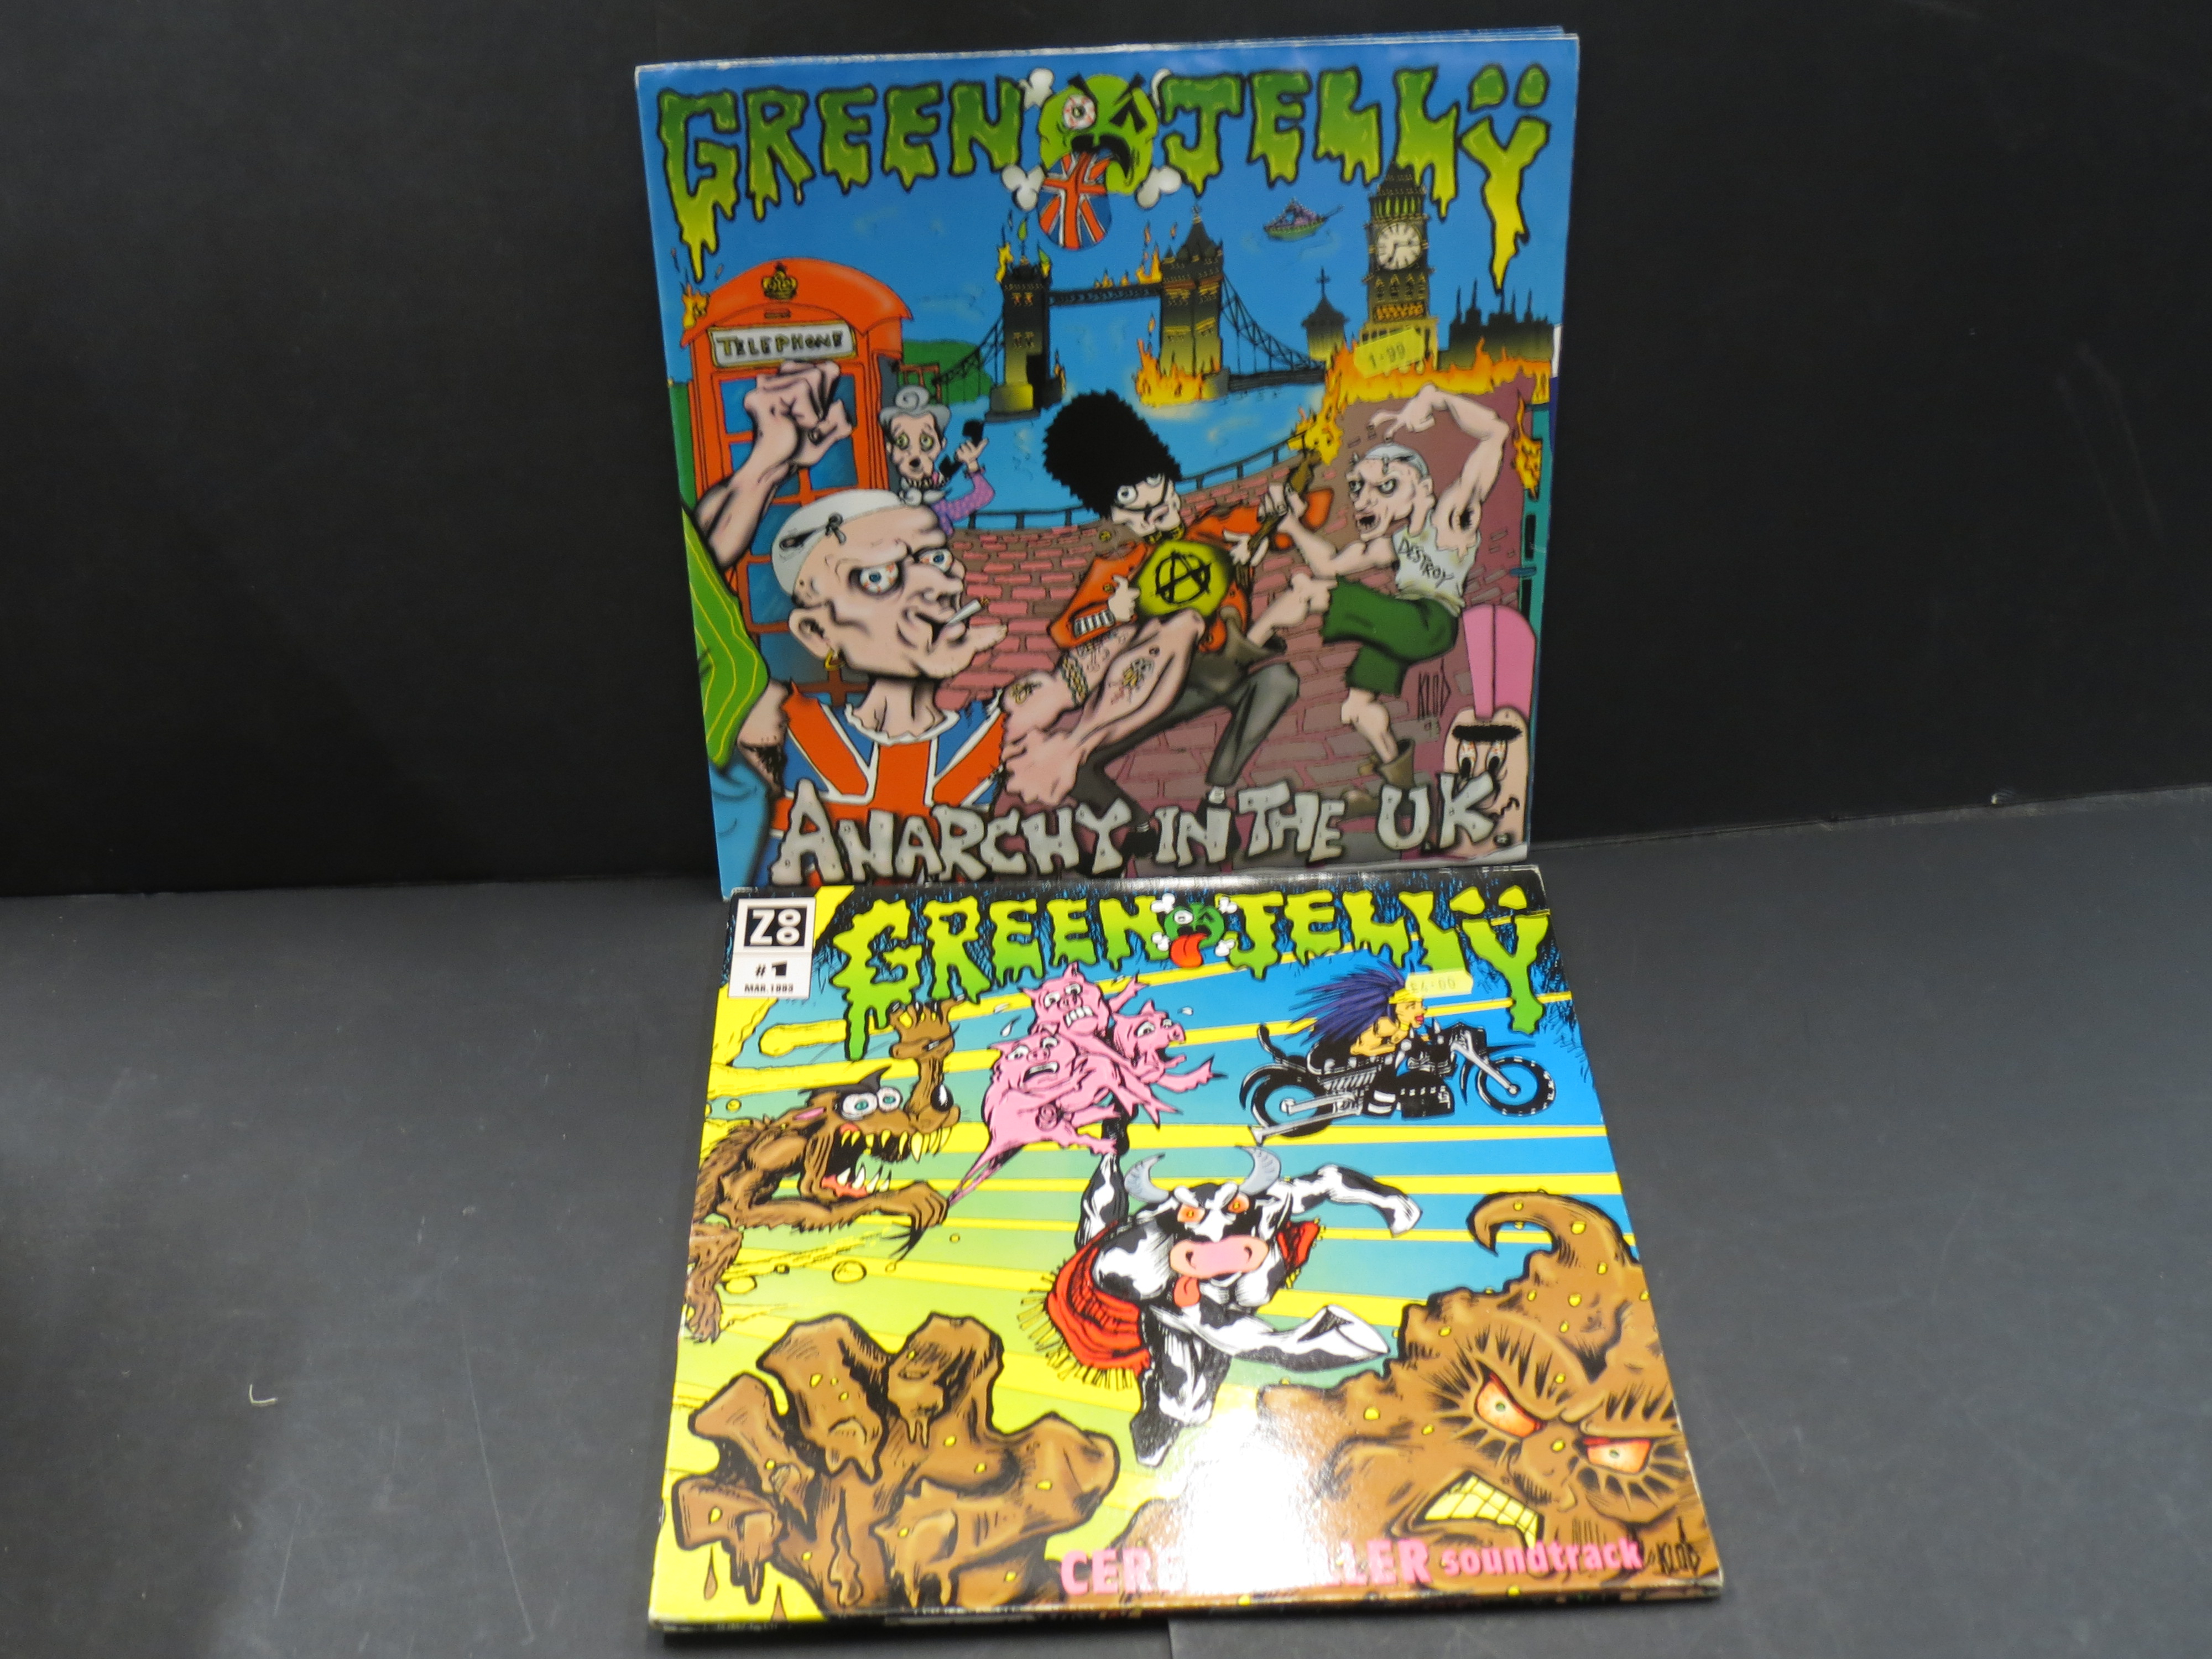 Vinyl - Green Jelly 1 LP and 1 12" single to include Cereal Killer Soundtrack (Zoo 7244511038 1) and